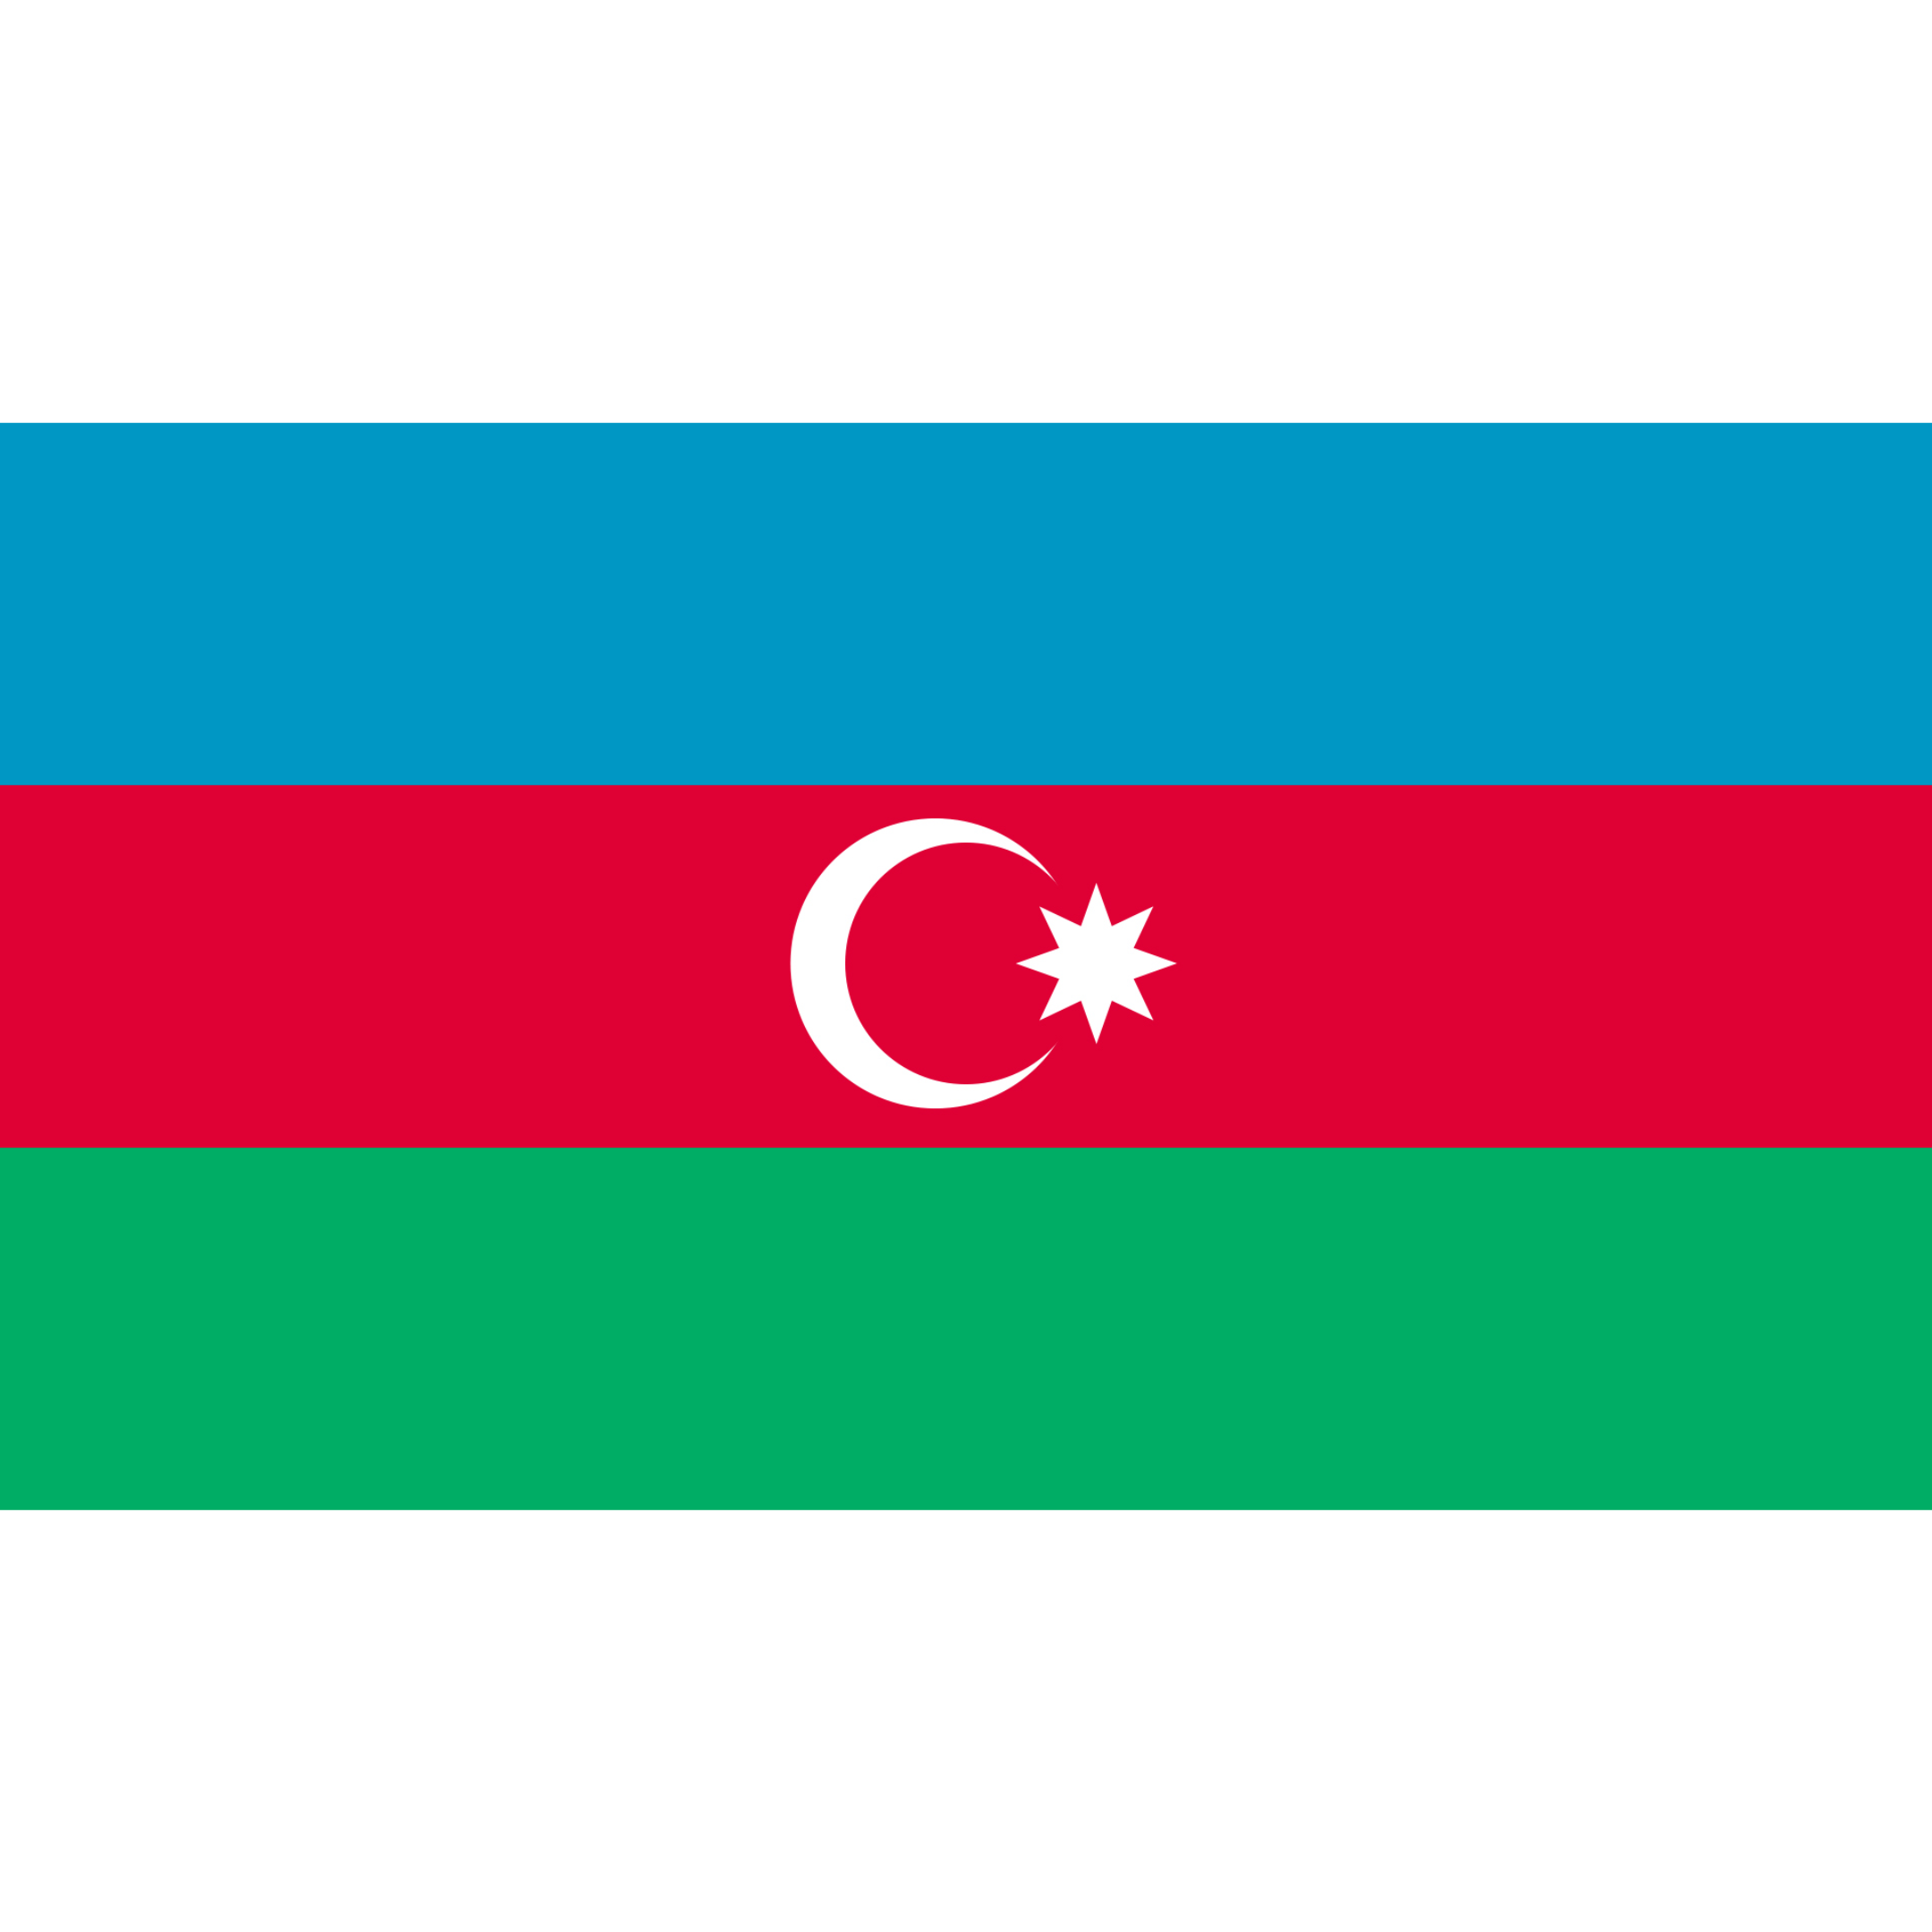 The Azerbaijani flag has 3 horizontal stripes in blue, red and green with a white crescent and 8-point star in the centre.